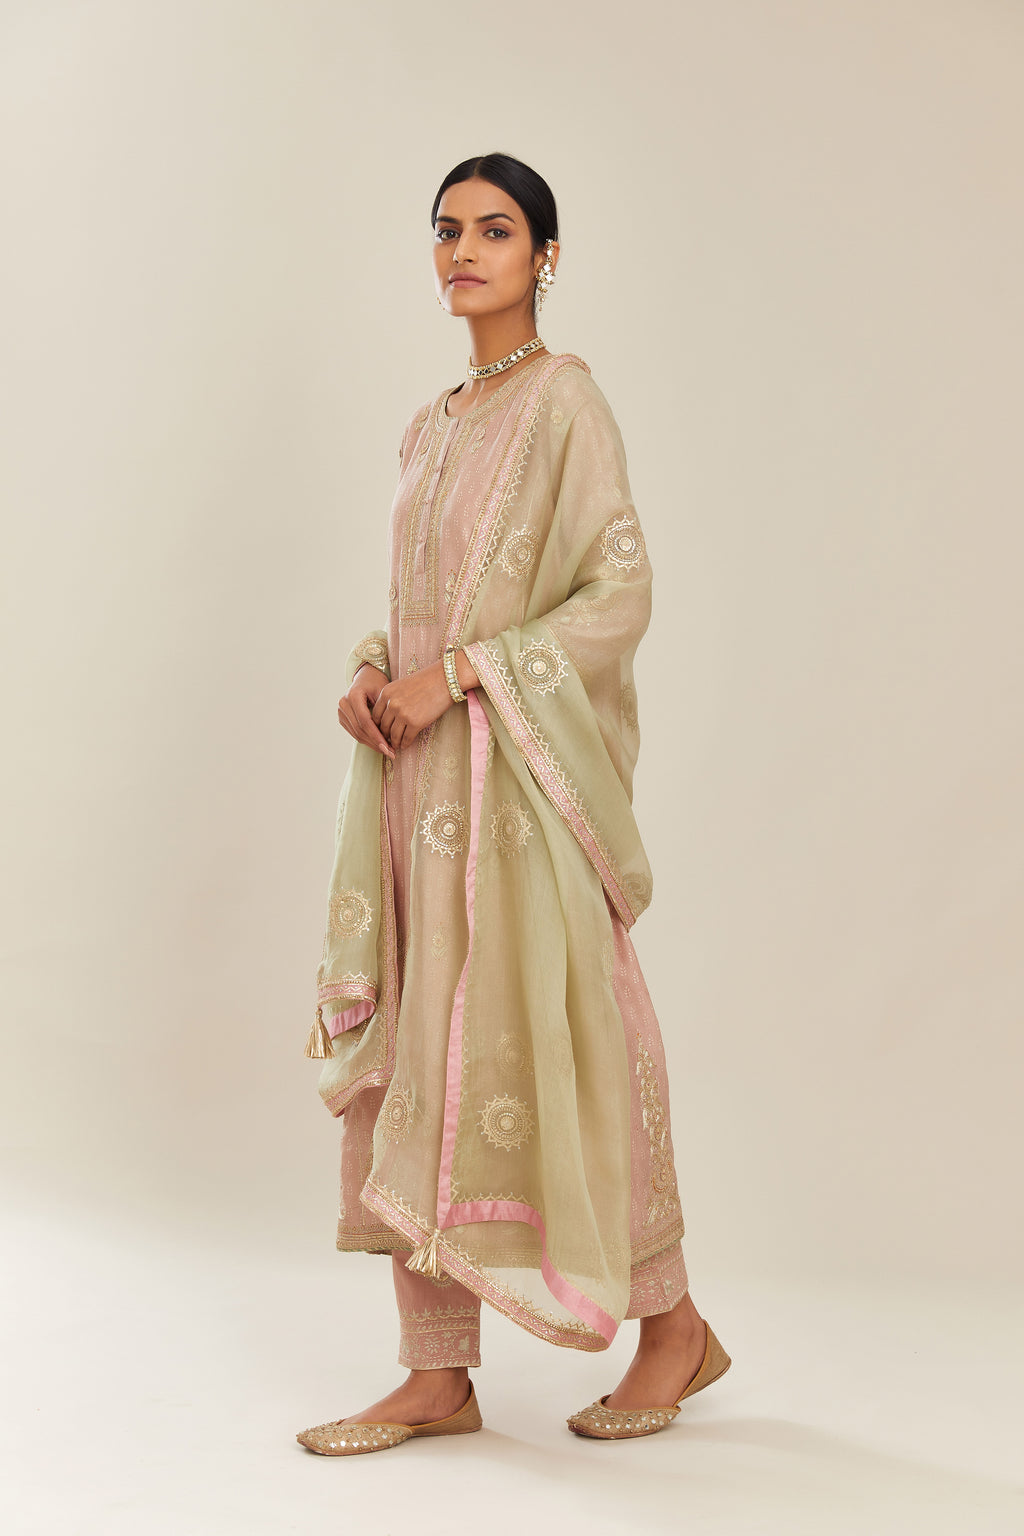 Sage green silk organza dupatta with delicate gold gota embroidery and contrast colored border running along all edges.